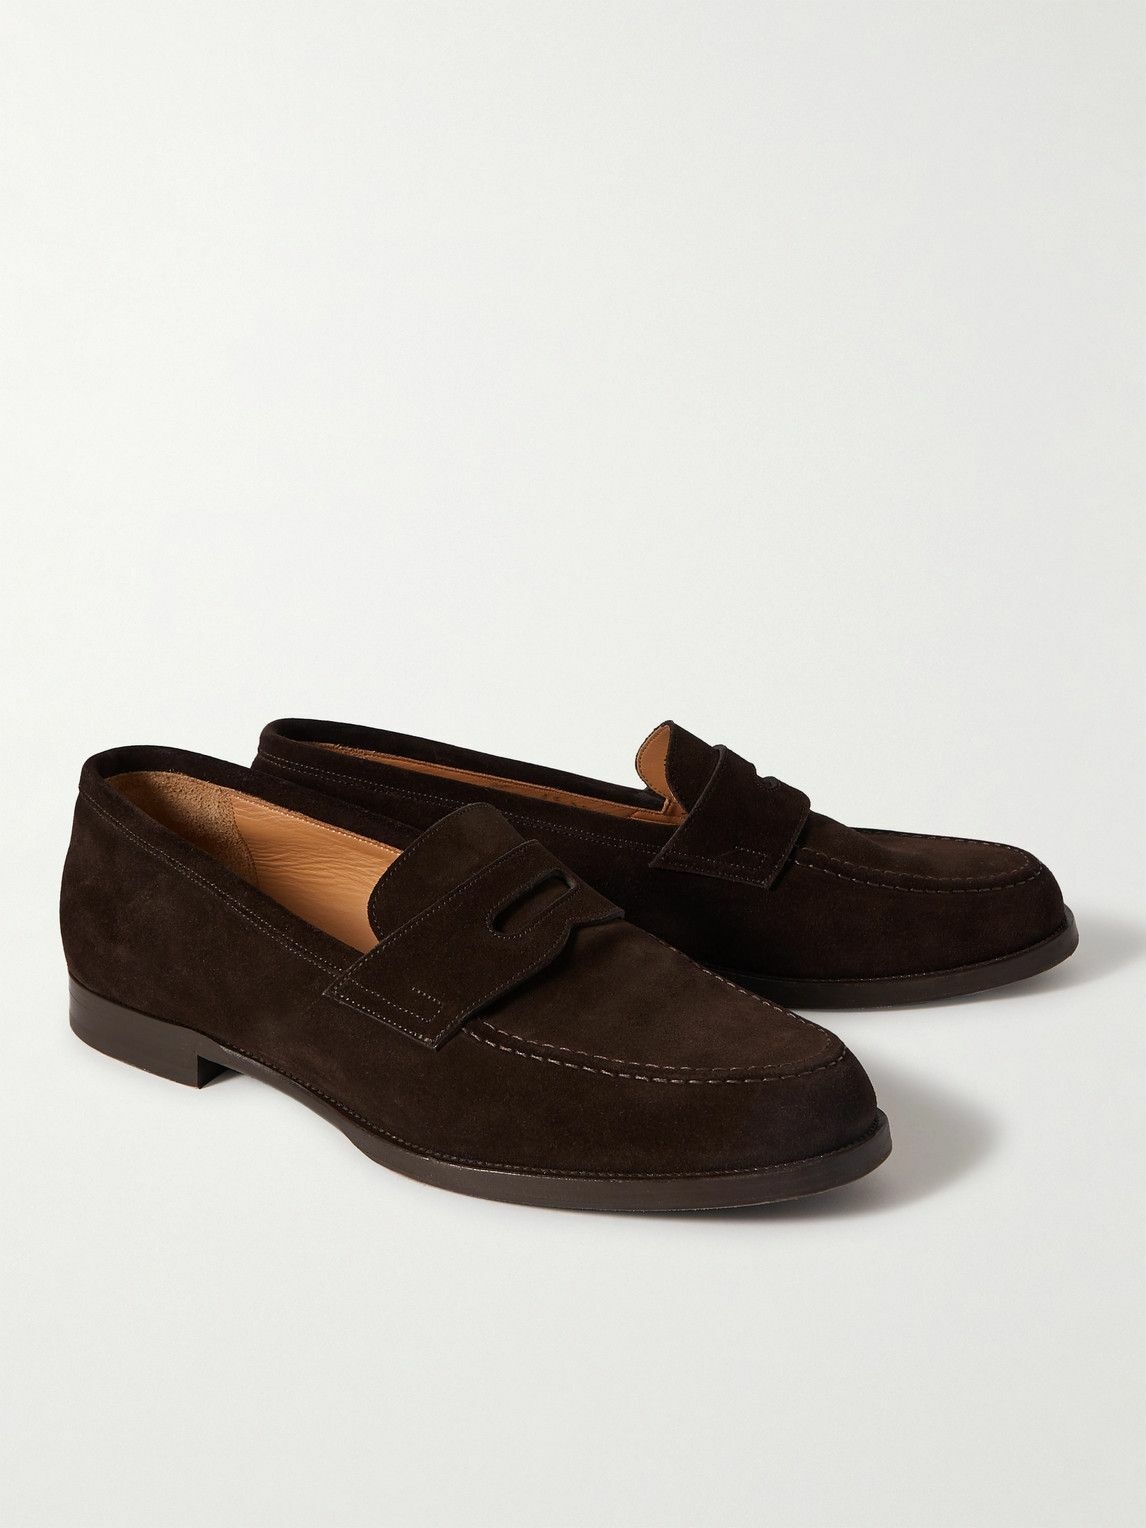 Dunhill - Audley Suede Penny Loafers - Brown Dunhill